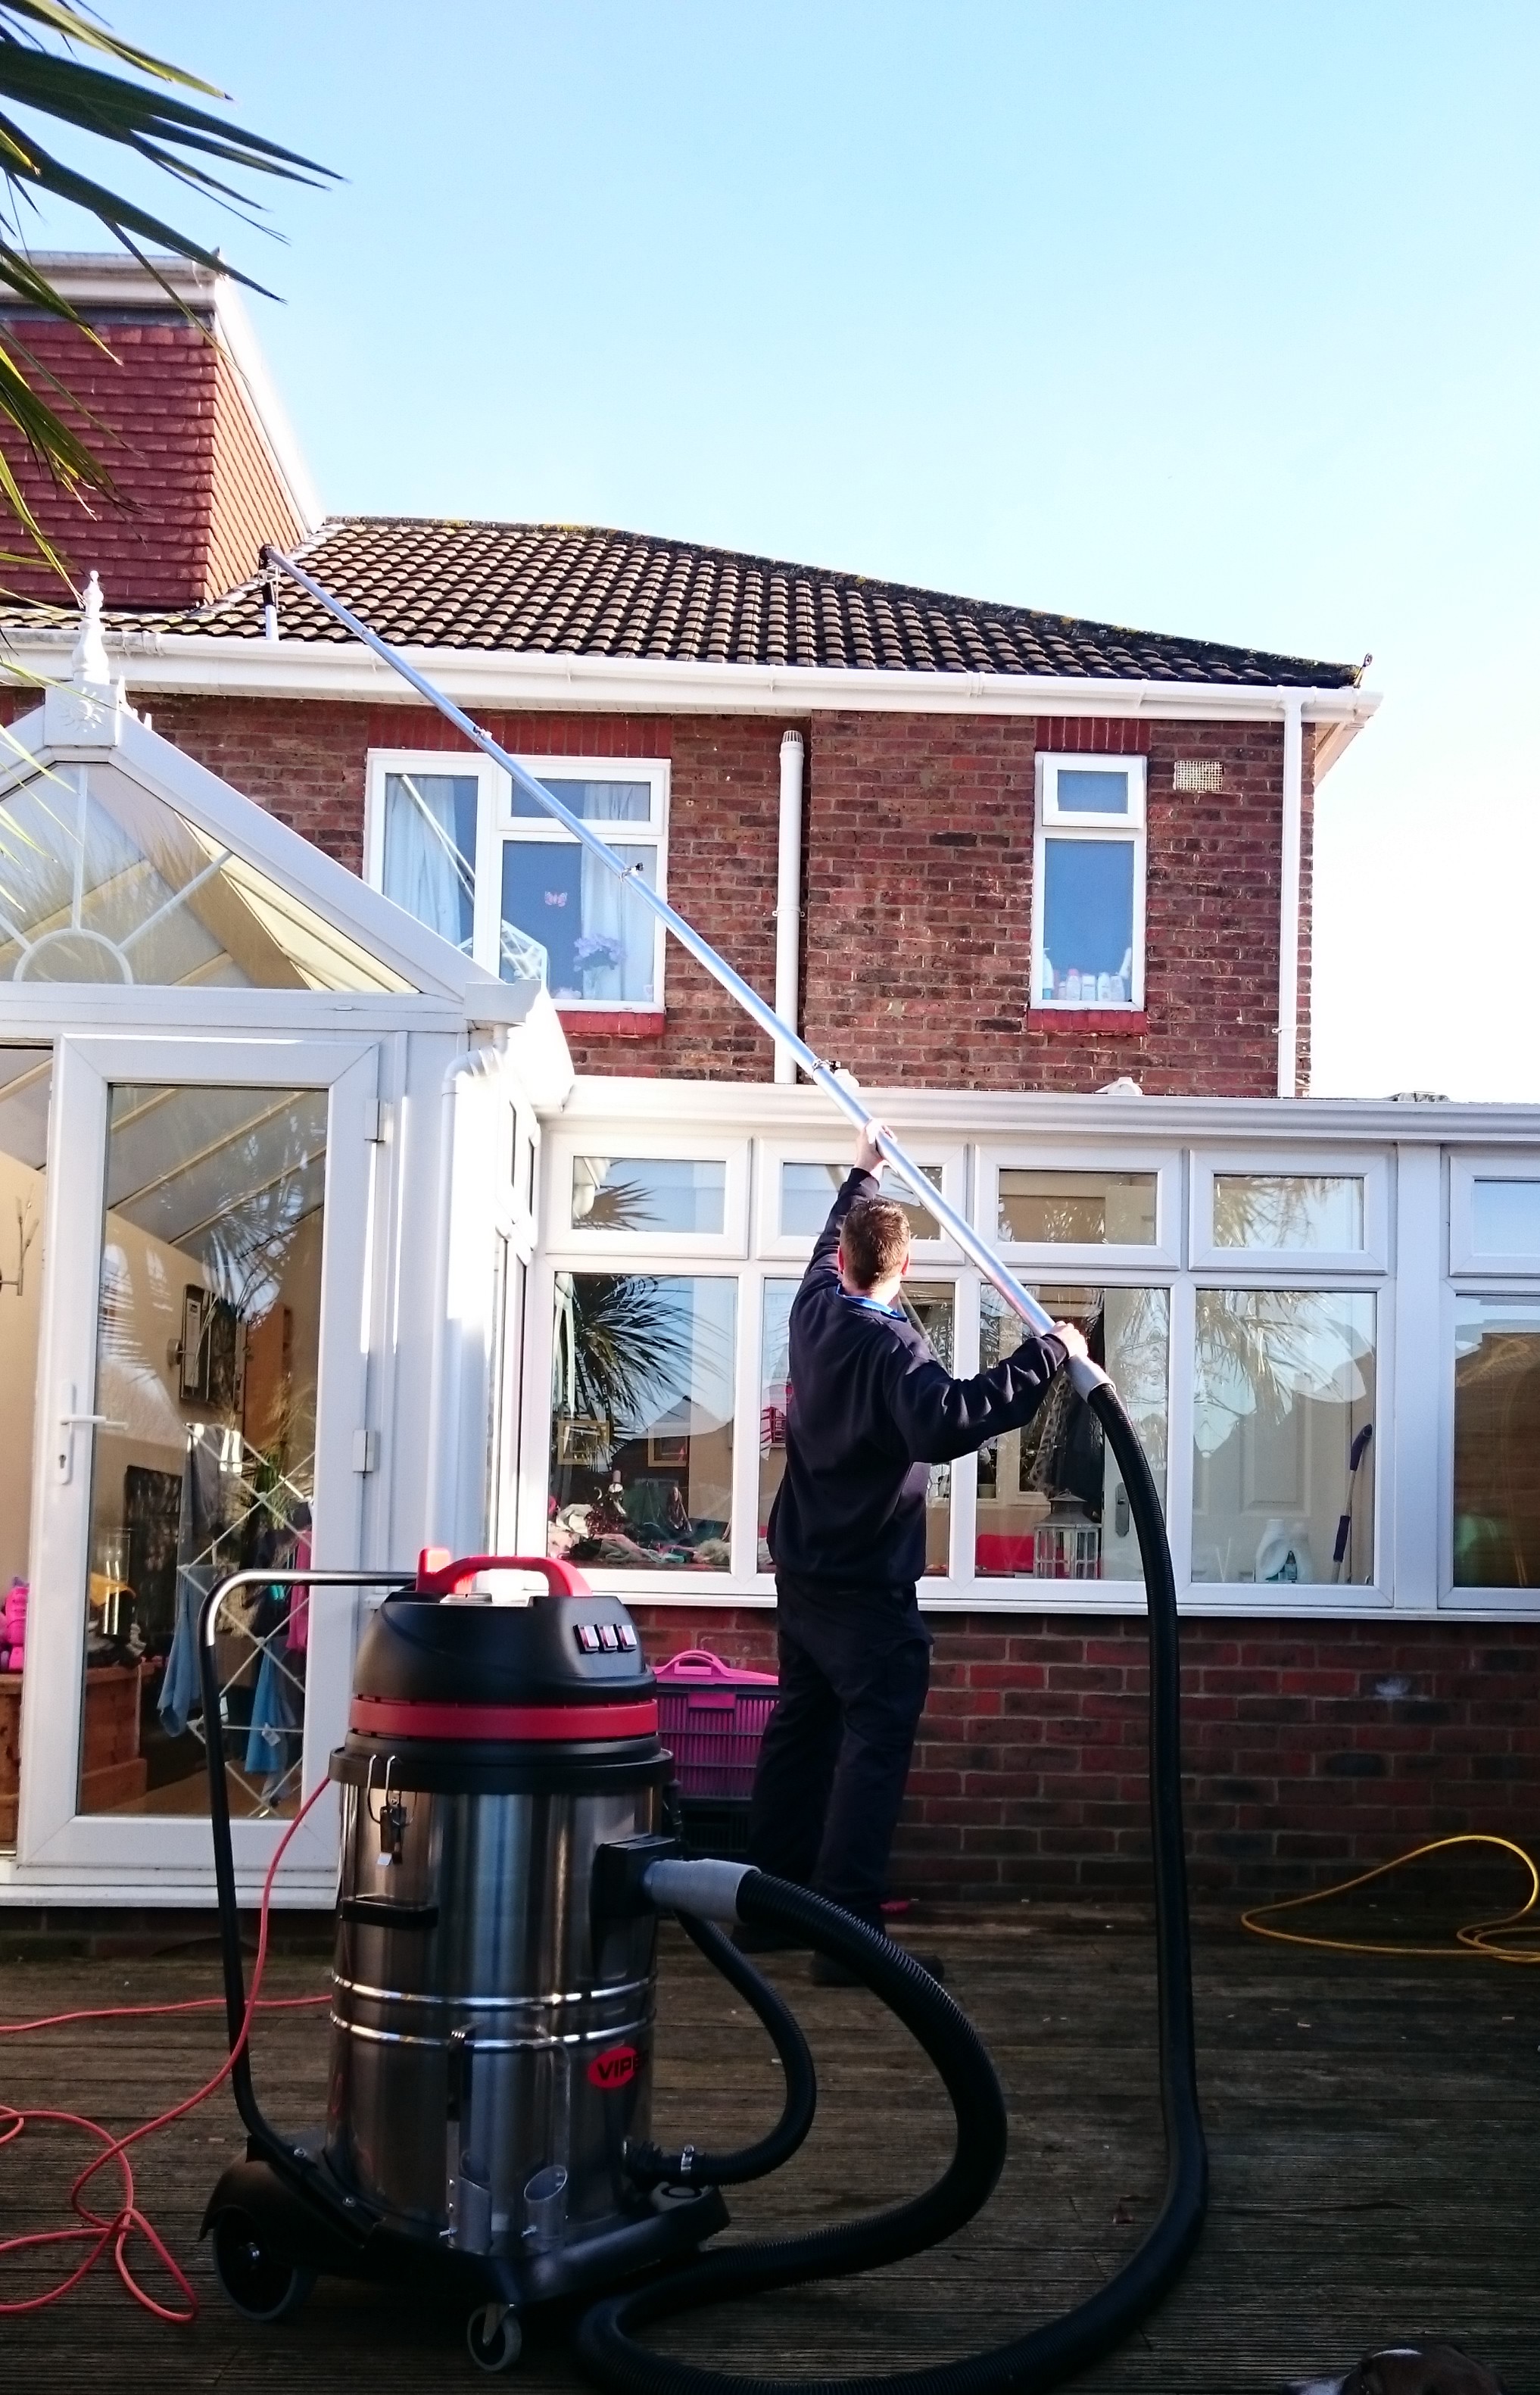  Over conservatories 